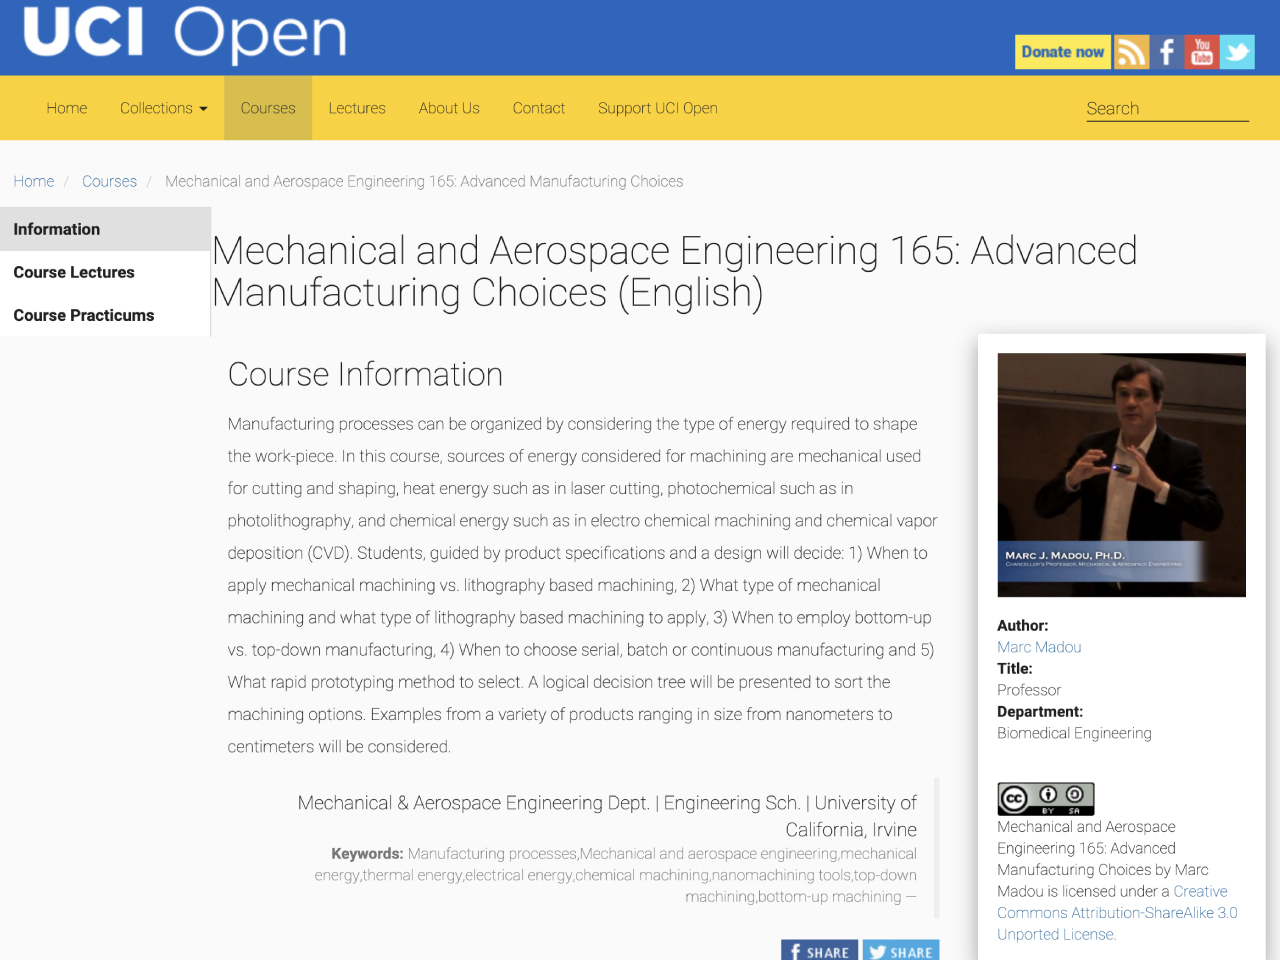 Mechanical and Aerospace Engineering 165: Advanced Manufacturing Choices